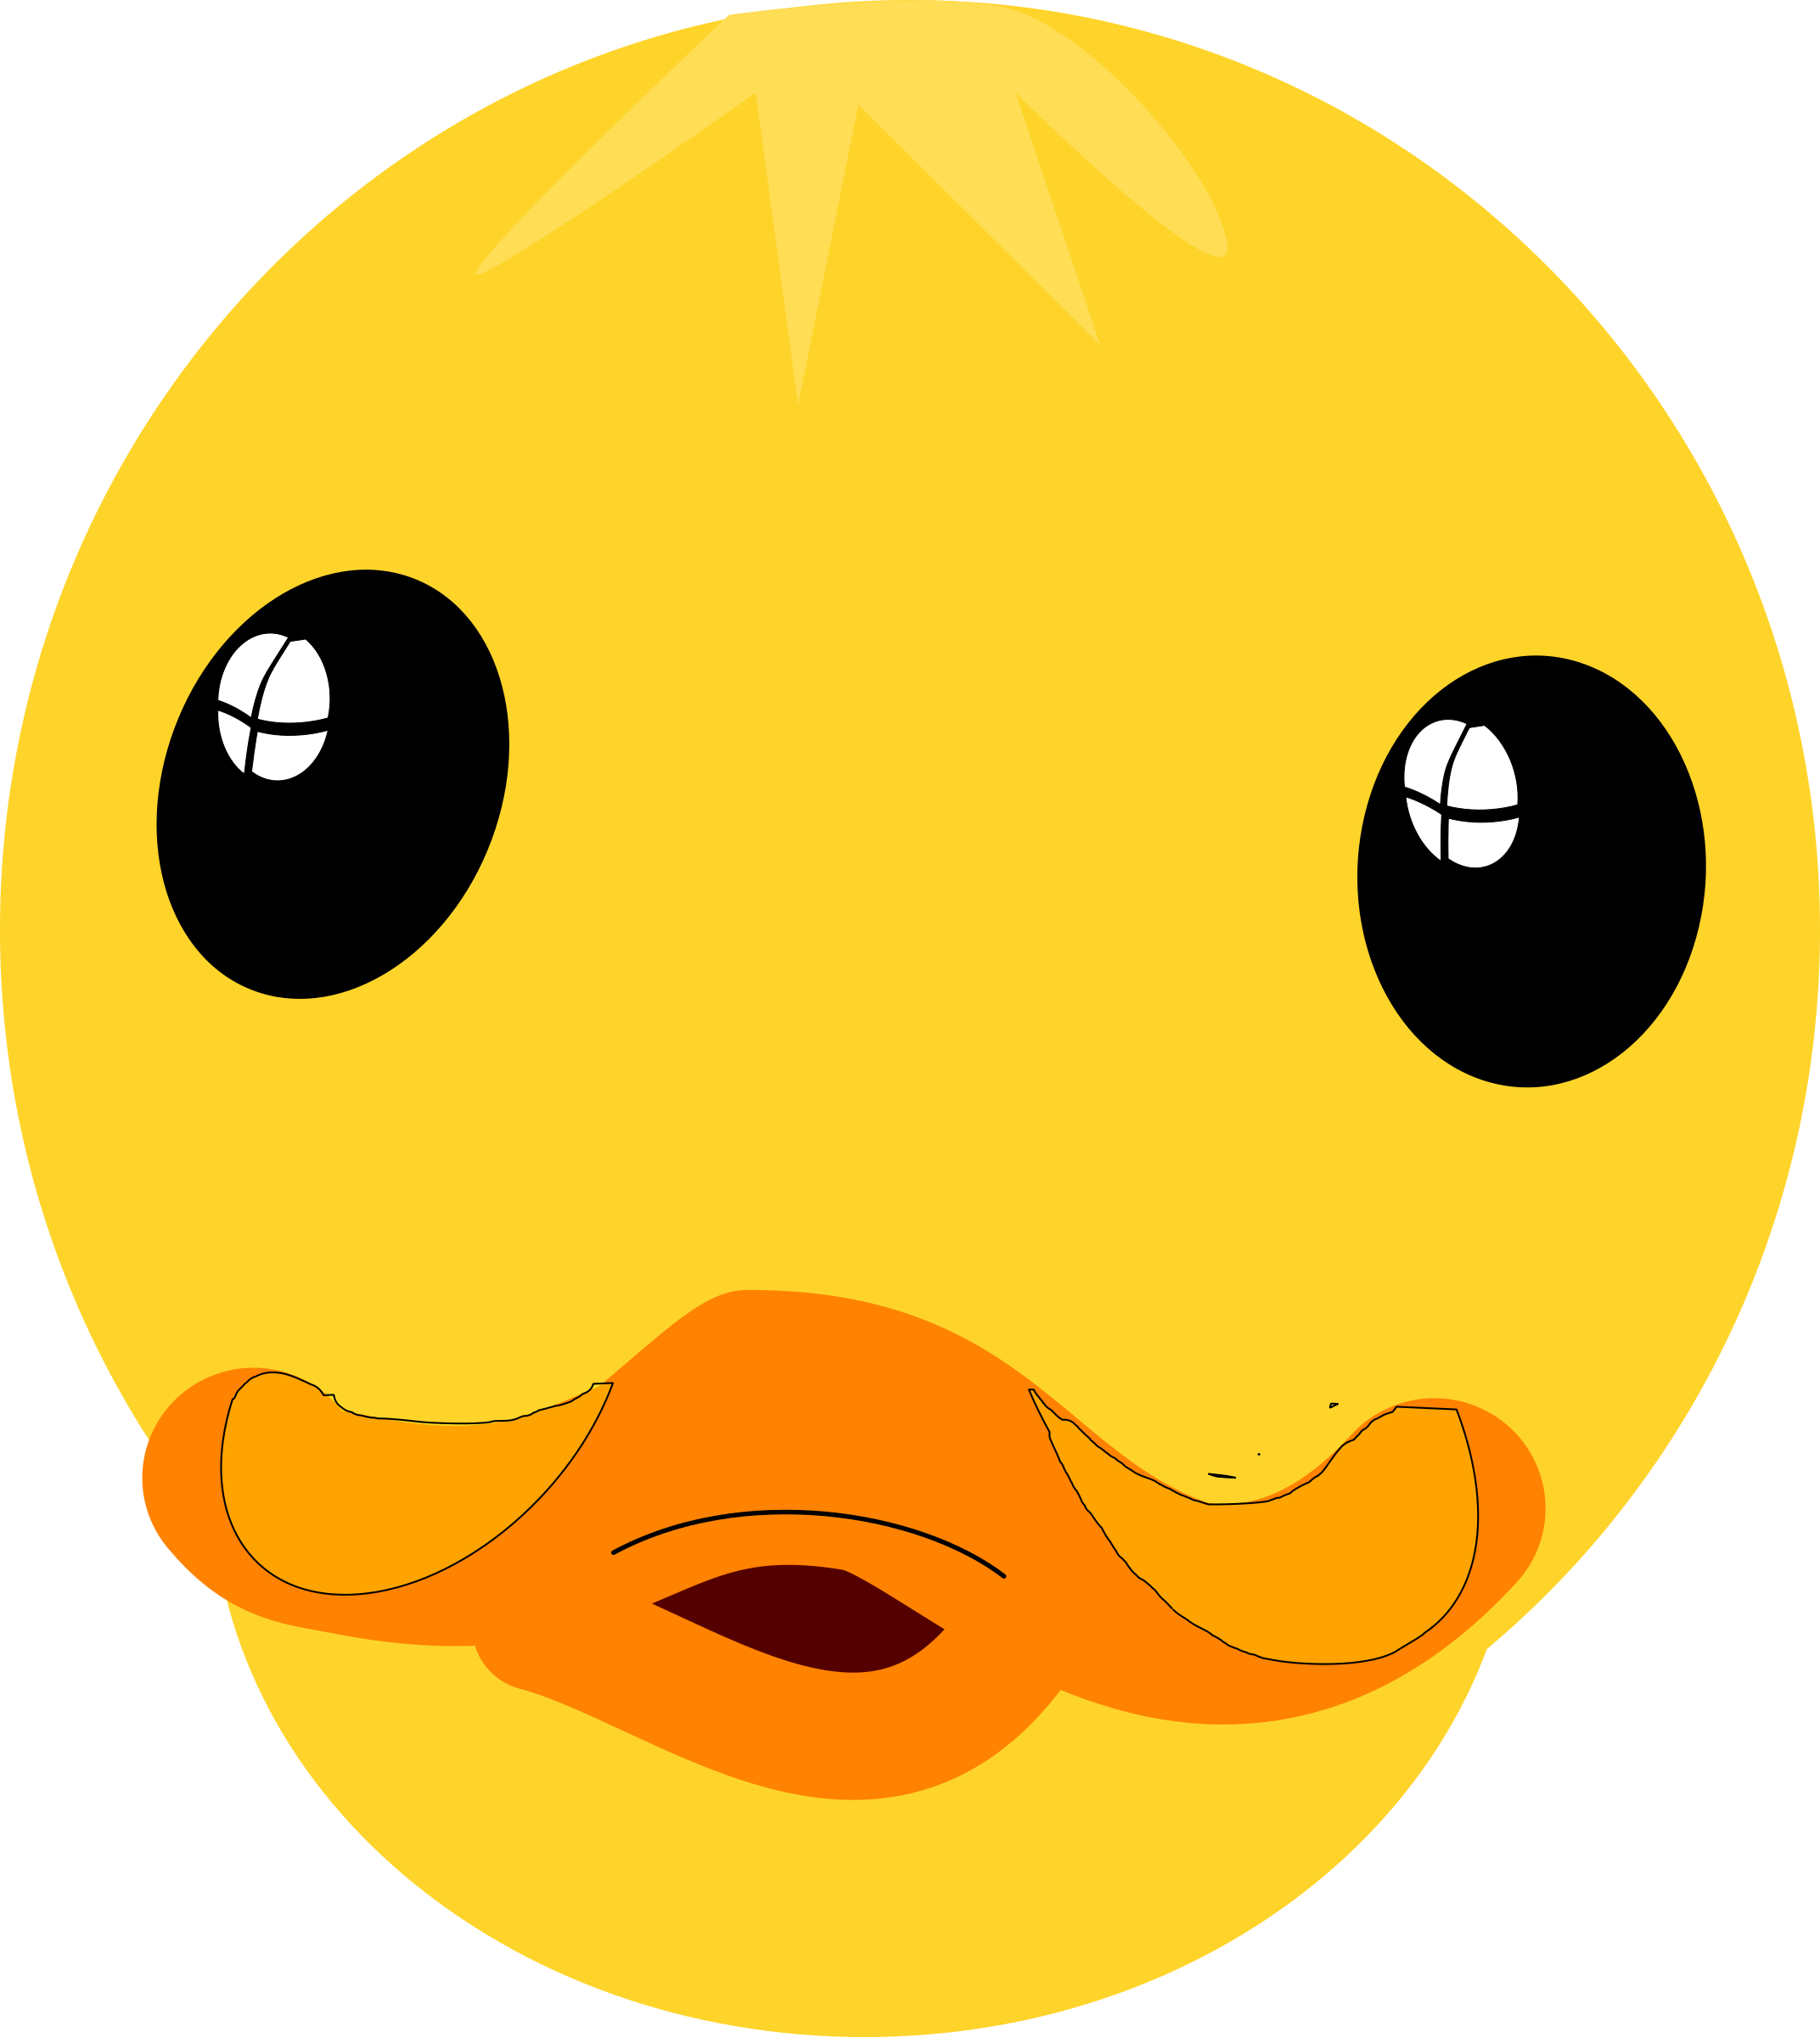 Duckling clipart duck face. Remote control car at